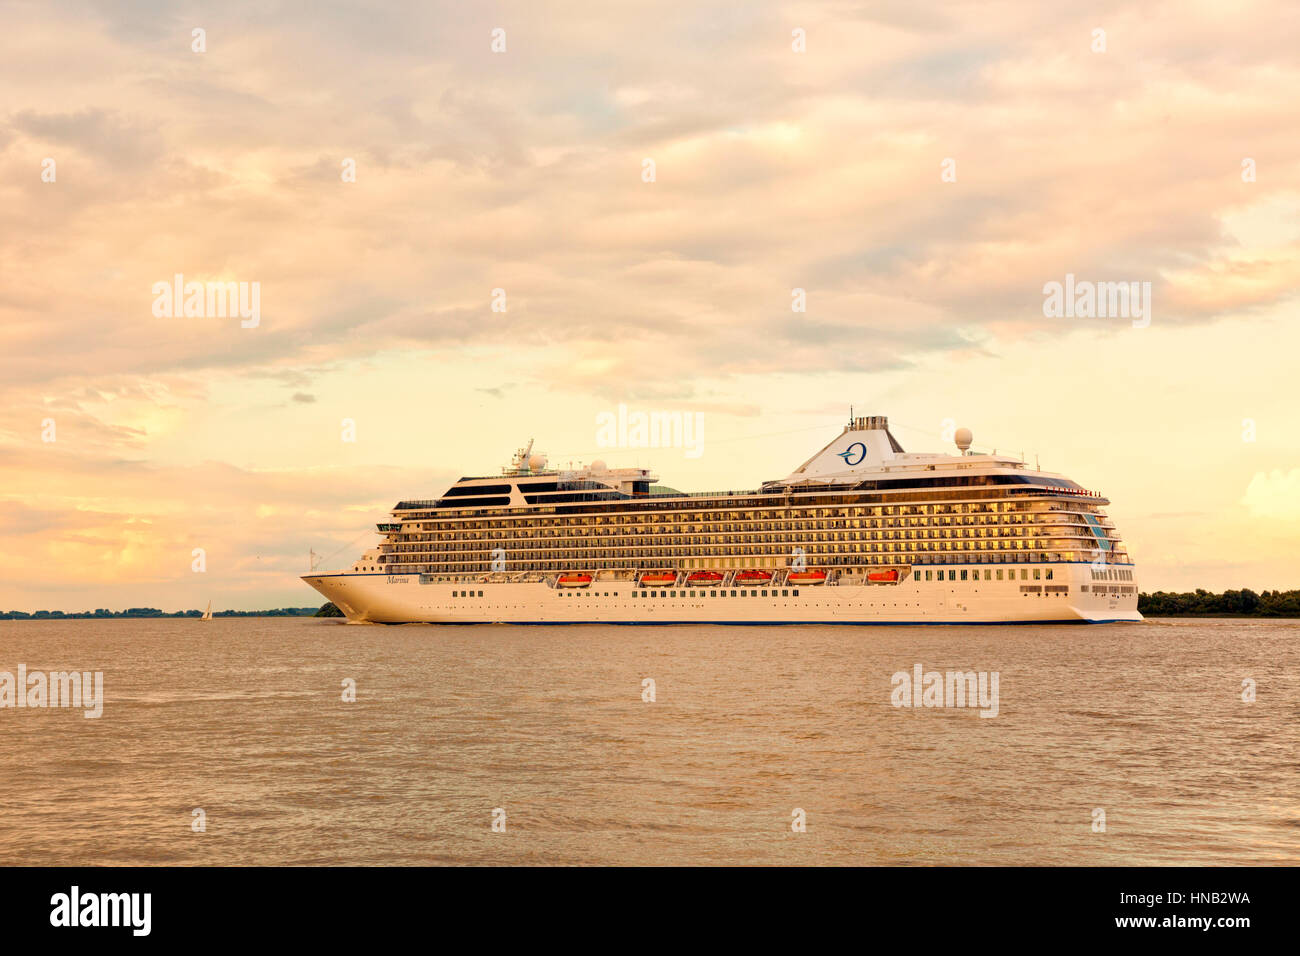 Stade, Germany - August 21, 2016: Cruise ship MS Marina, operated by Oceania Cruises, on the Elbe river near Hamburg. Stock Photo